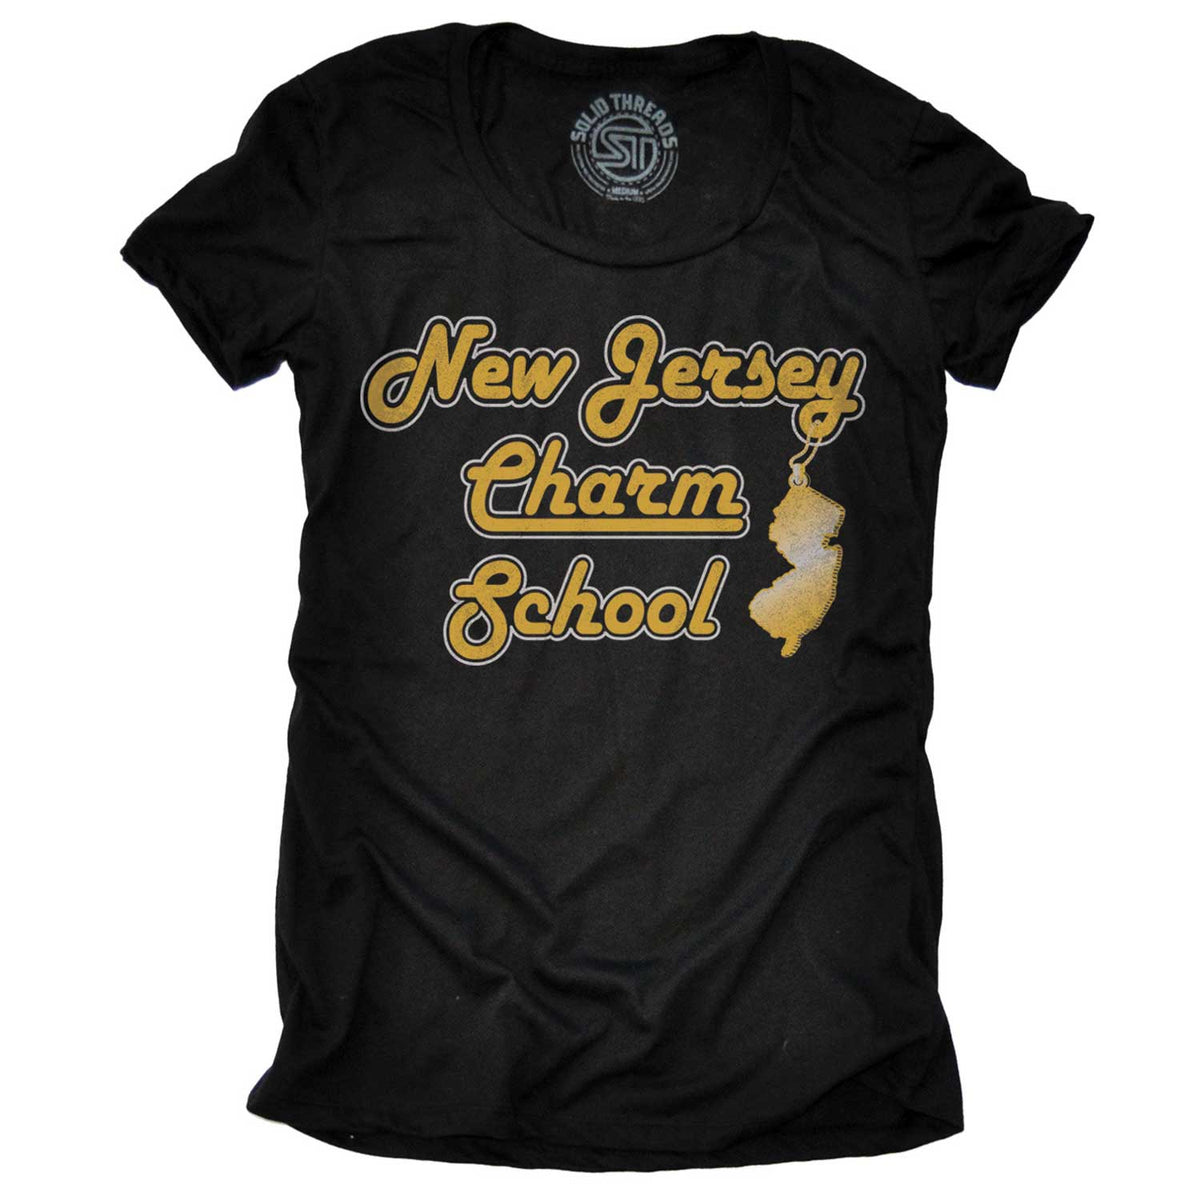 Women&#39;s New Jersey Charm School Vintage Graphic T-Shirt | Funny Garden State Tee | Solid Threads